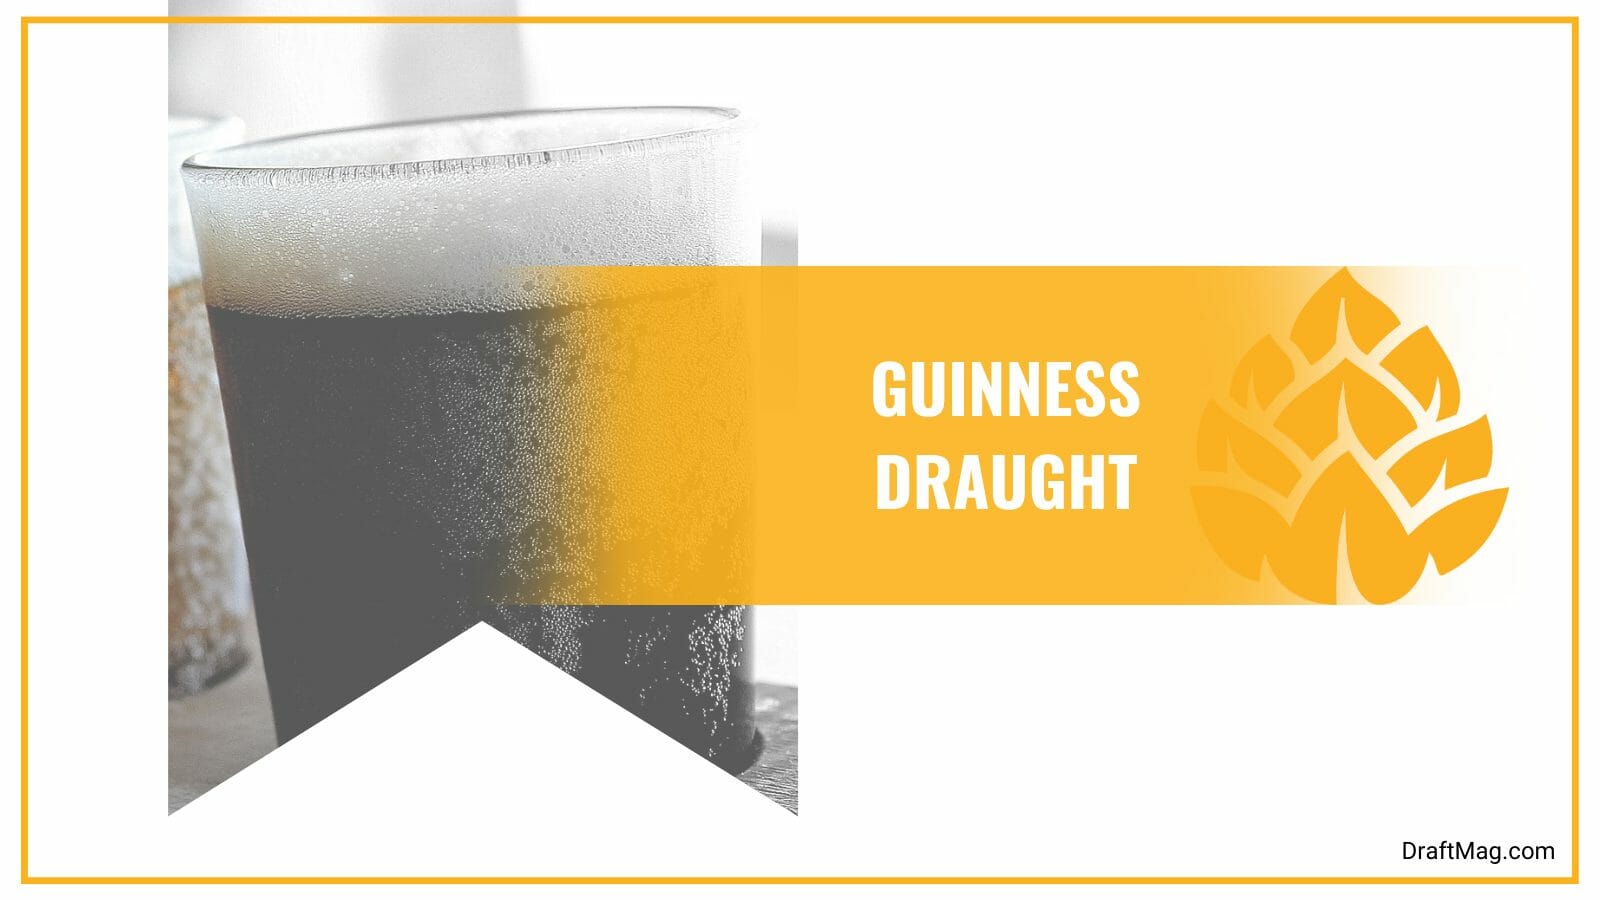 Guinness draught with roasted barley